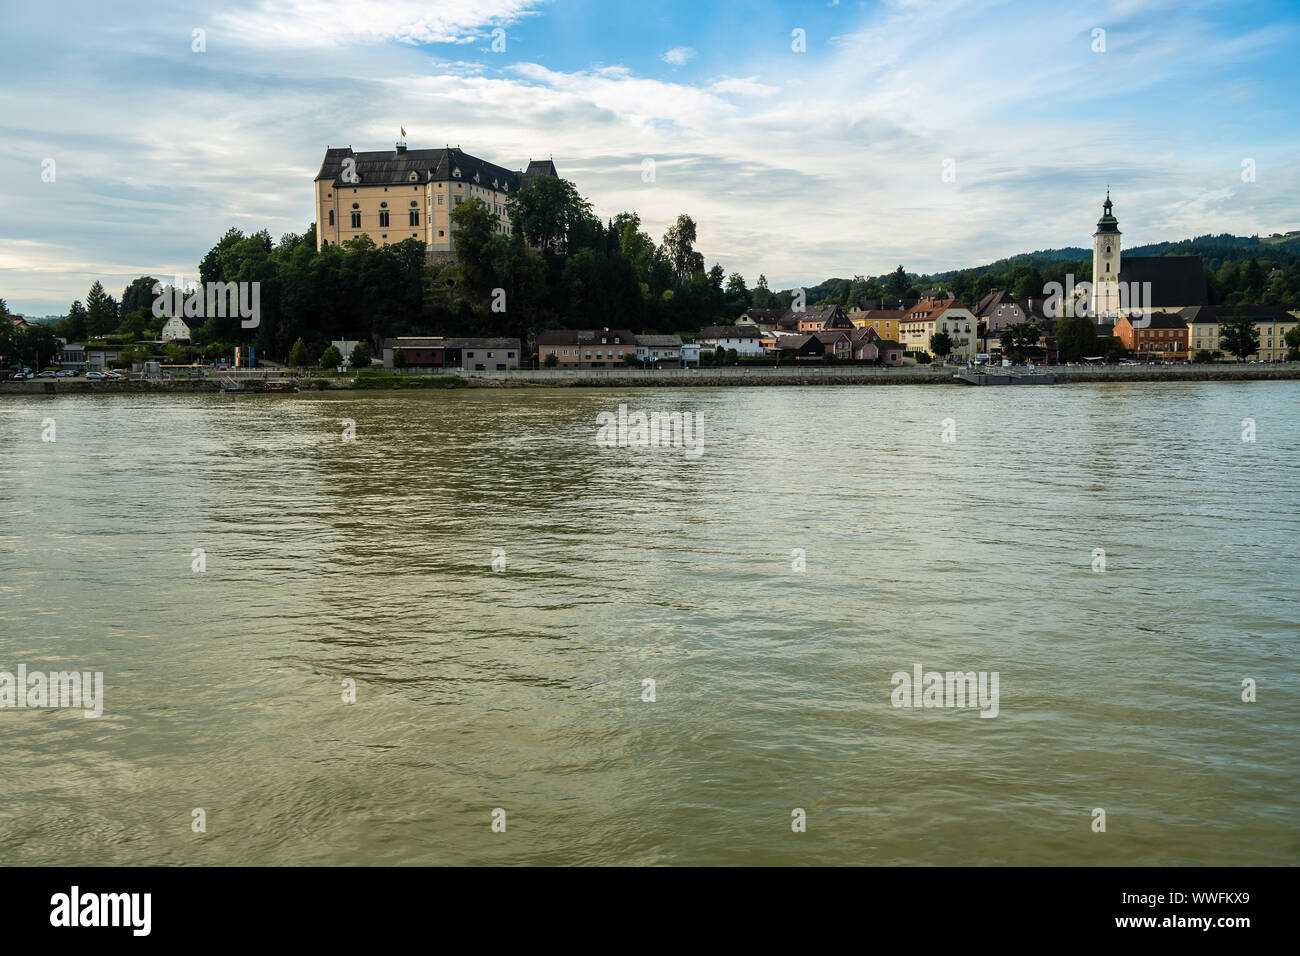 The village of Grein on the bank of the Danube, Austria Stock Photo